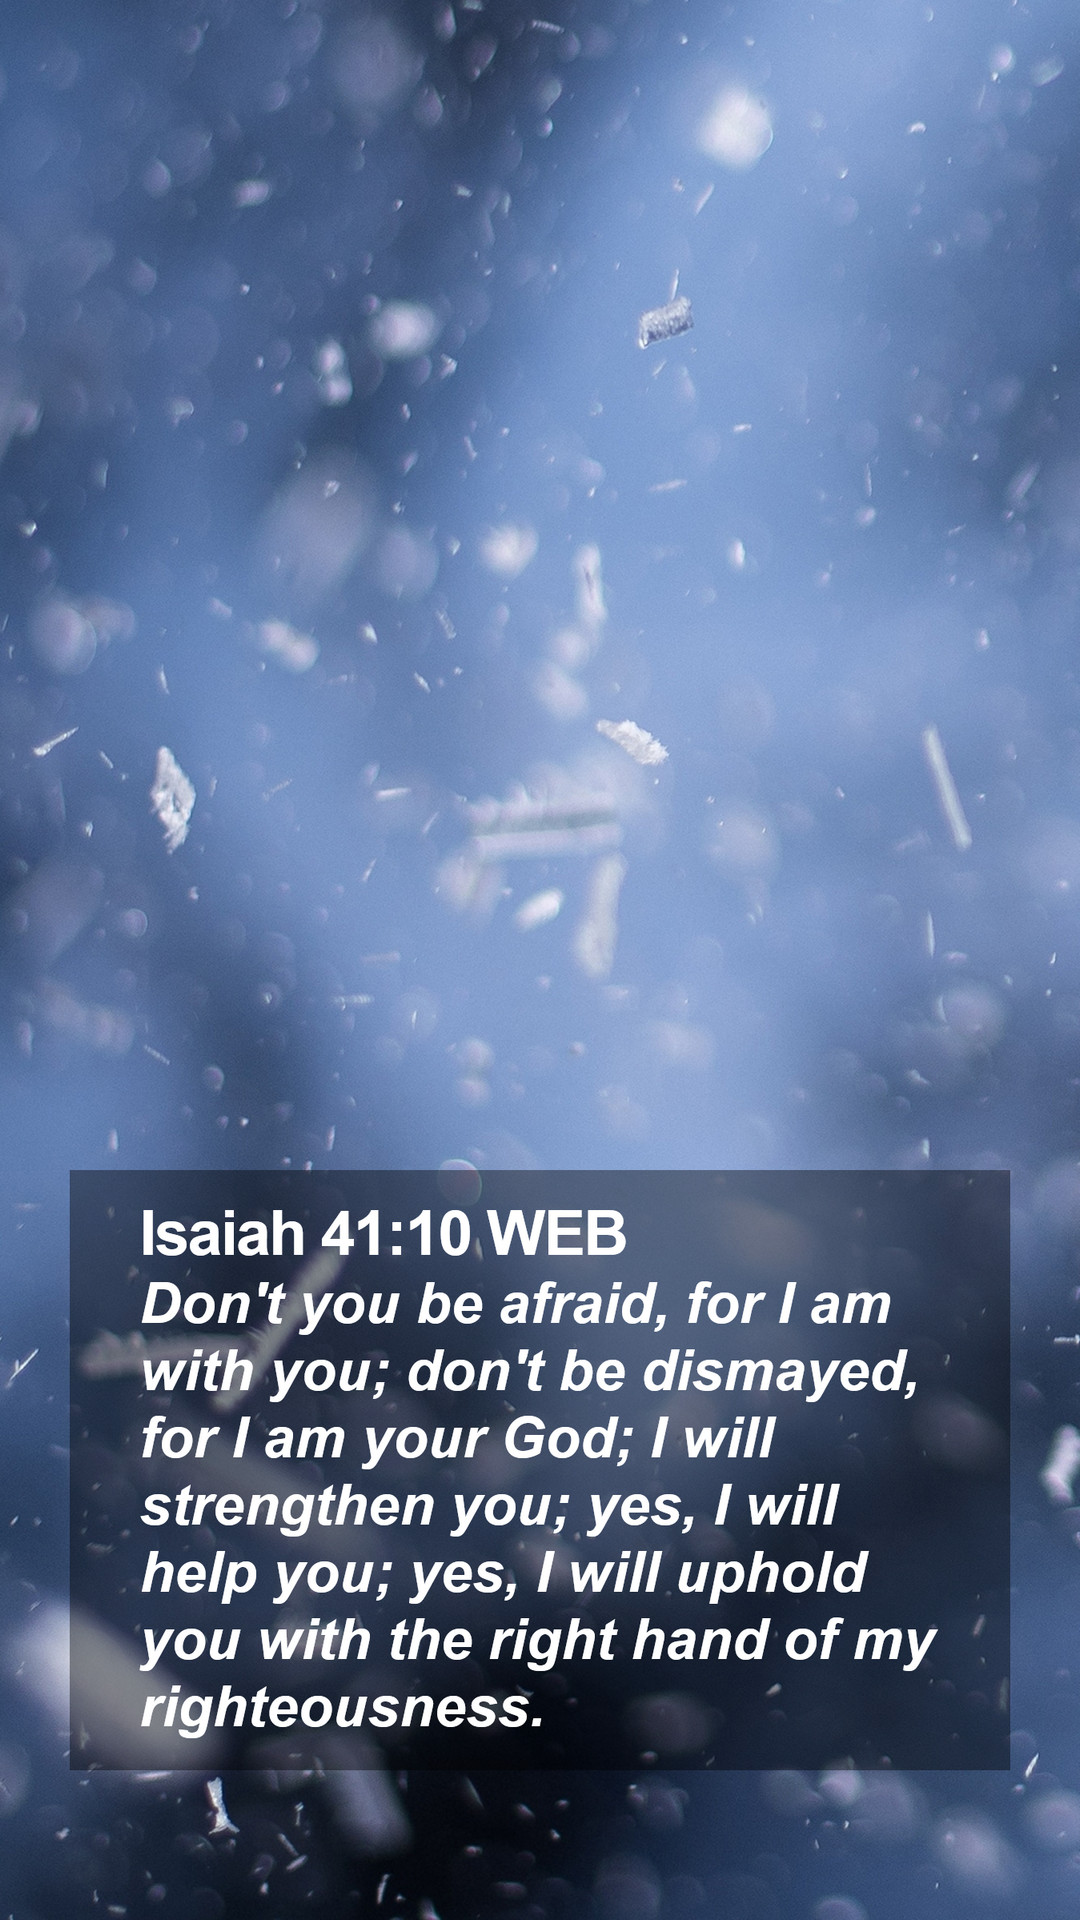 Isaiah 41:10 WEB Mobile Phone Wallpaper't you be afraid, for I am with you; don't be